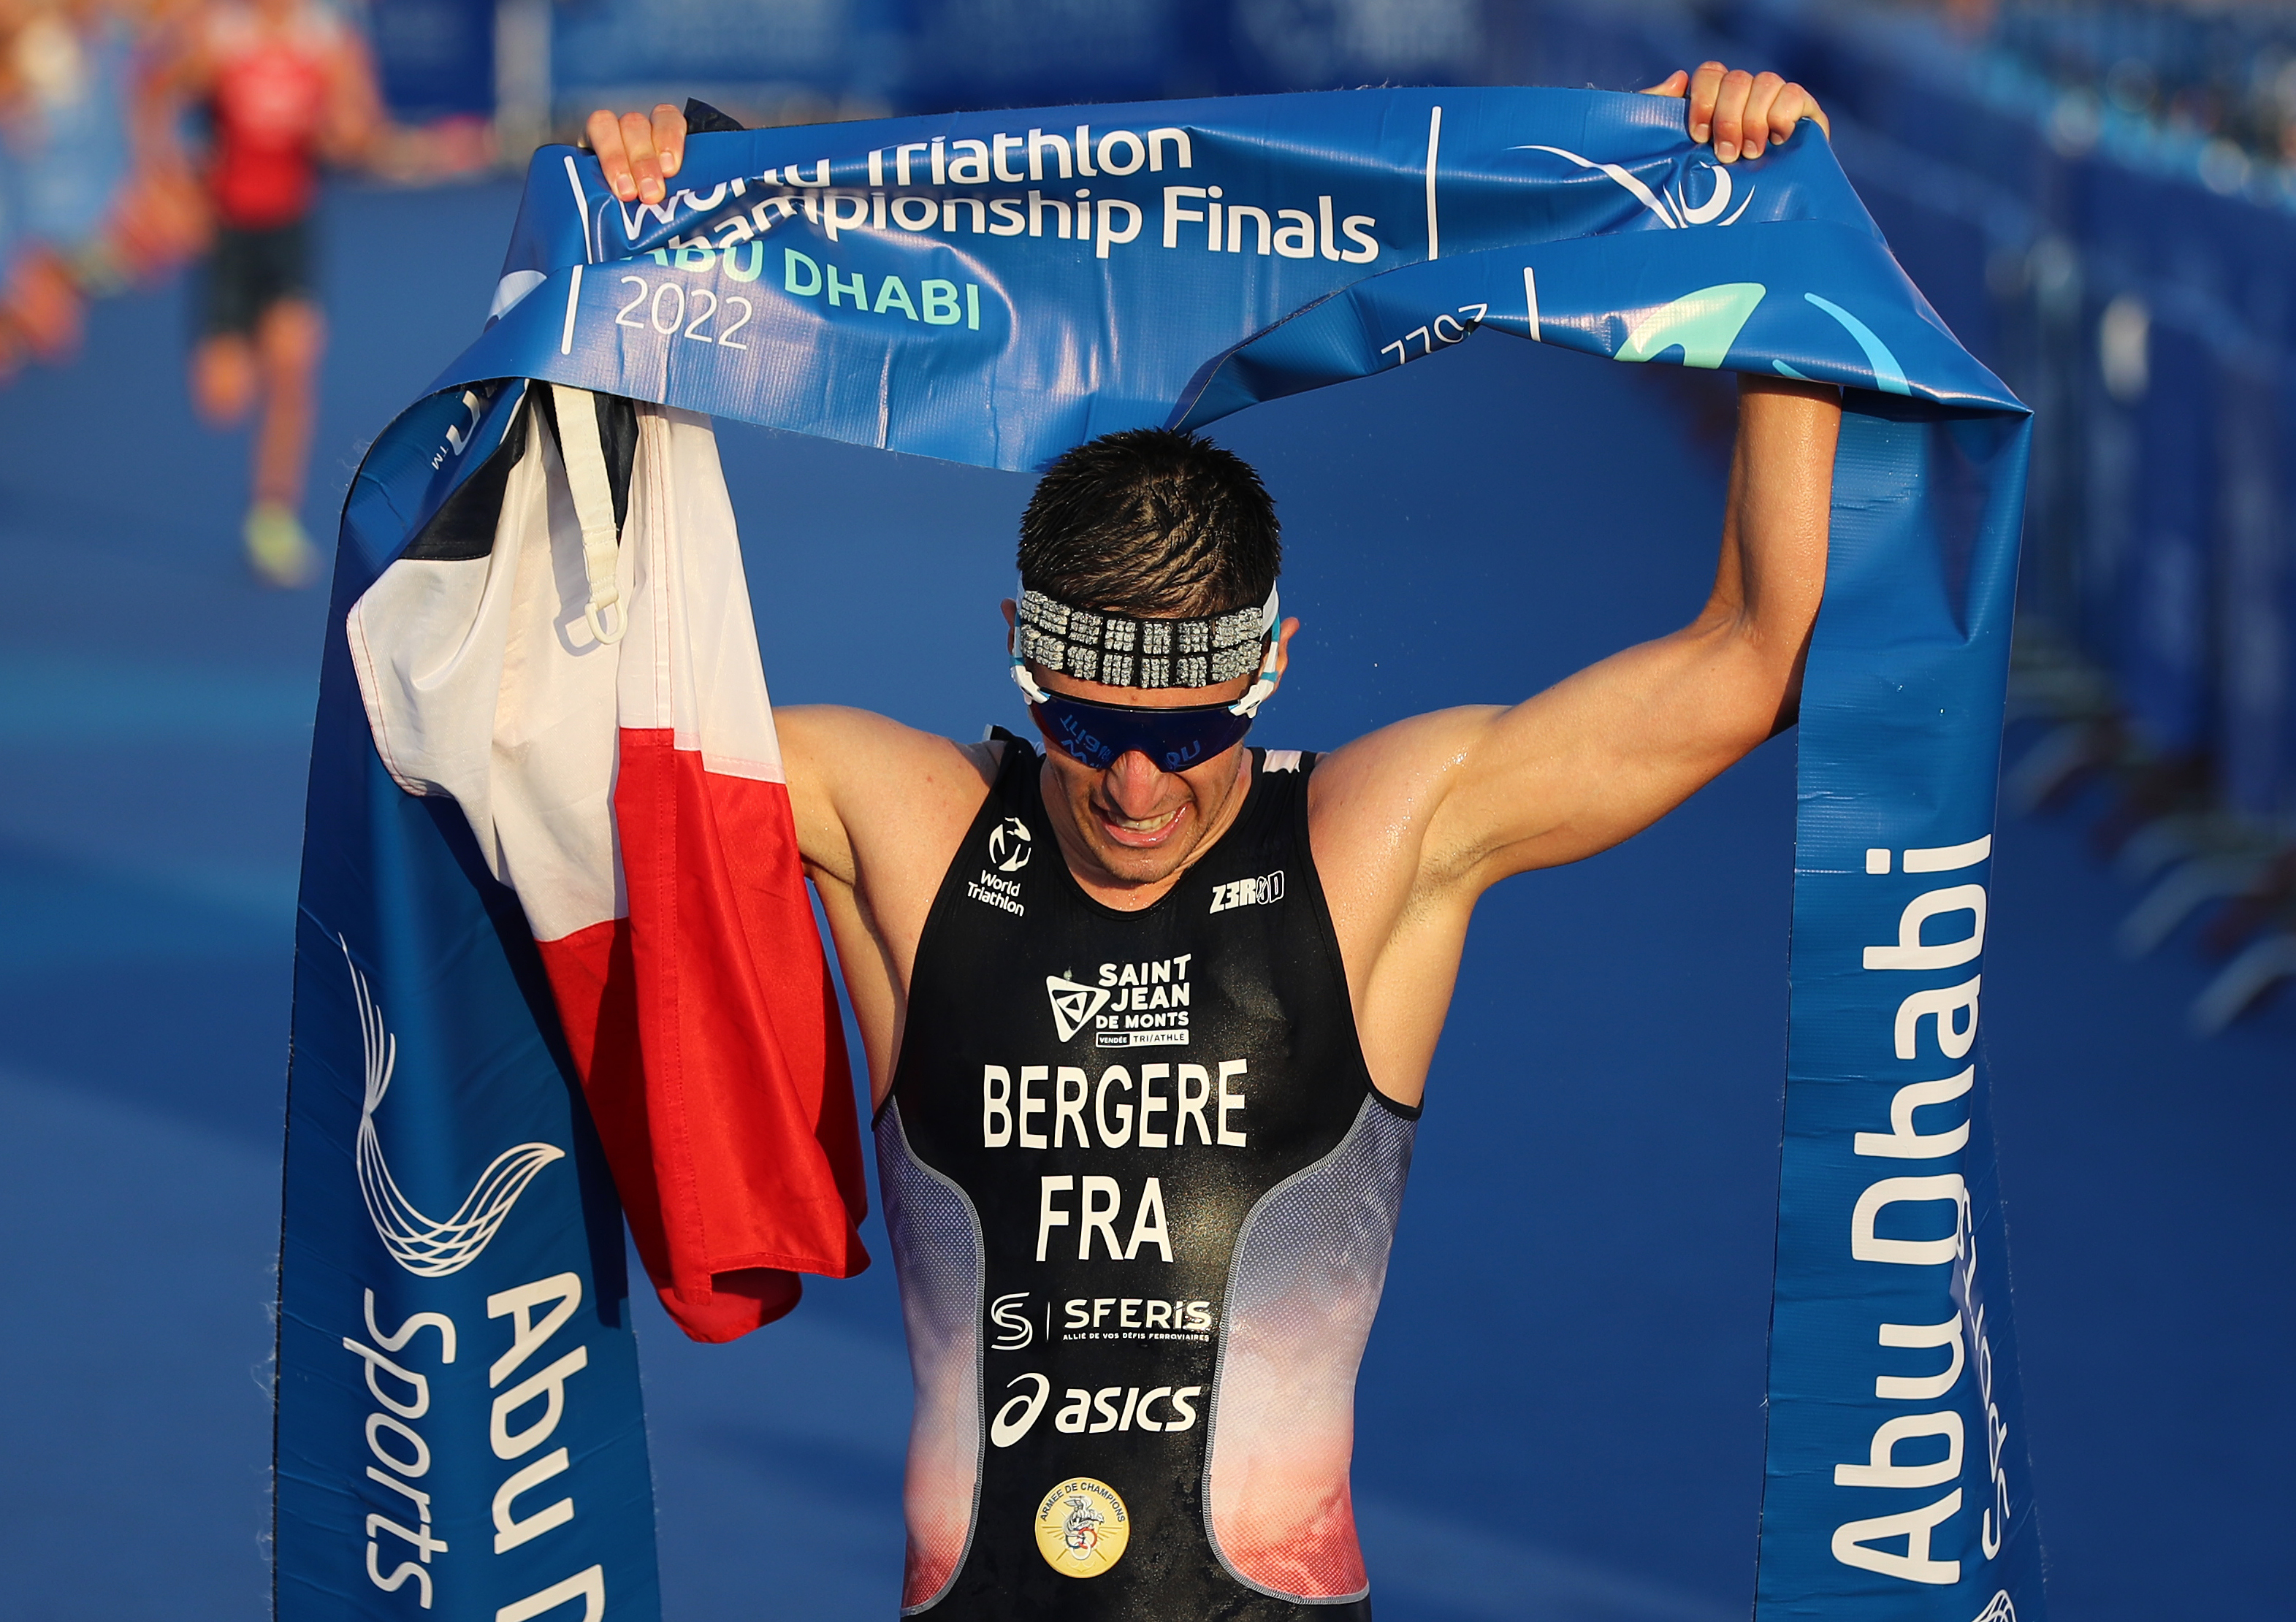 Leo Bergere clinches Abu Dhabi World Triathlon Championship Finals and overall